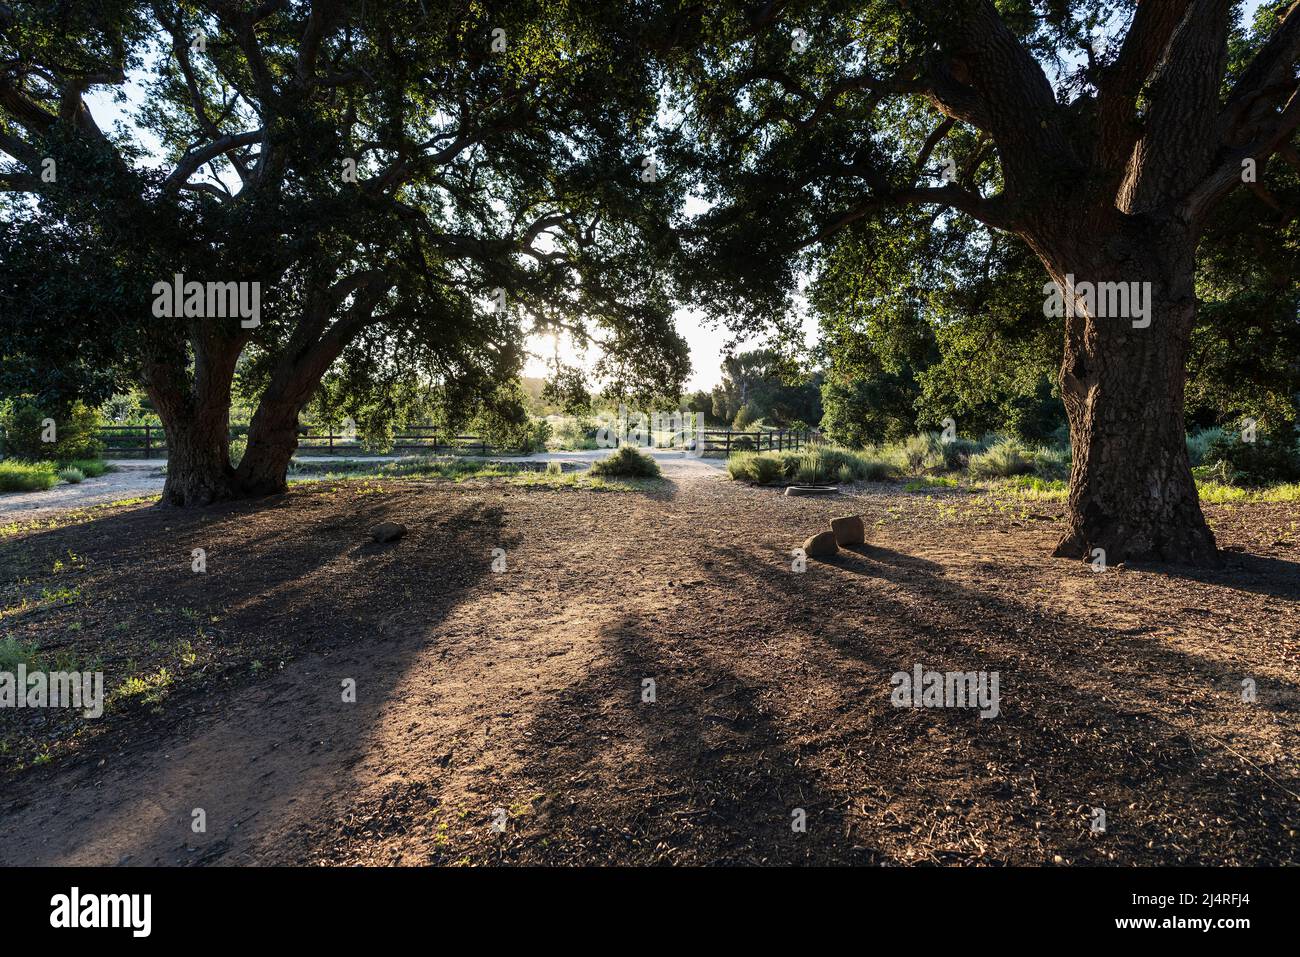 Large oak trees in dawn light at Chatsworth Park South in the San Fernando Valley area of Los Angeles, California. Stock Photo